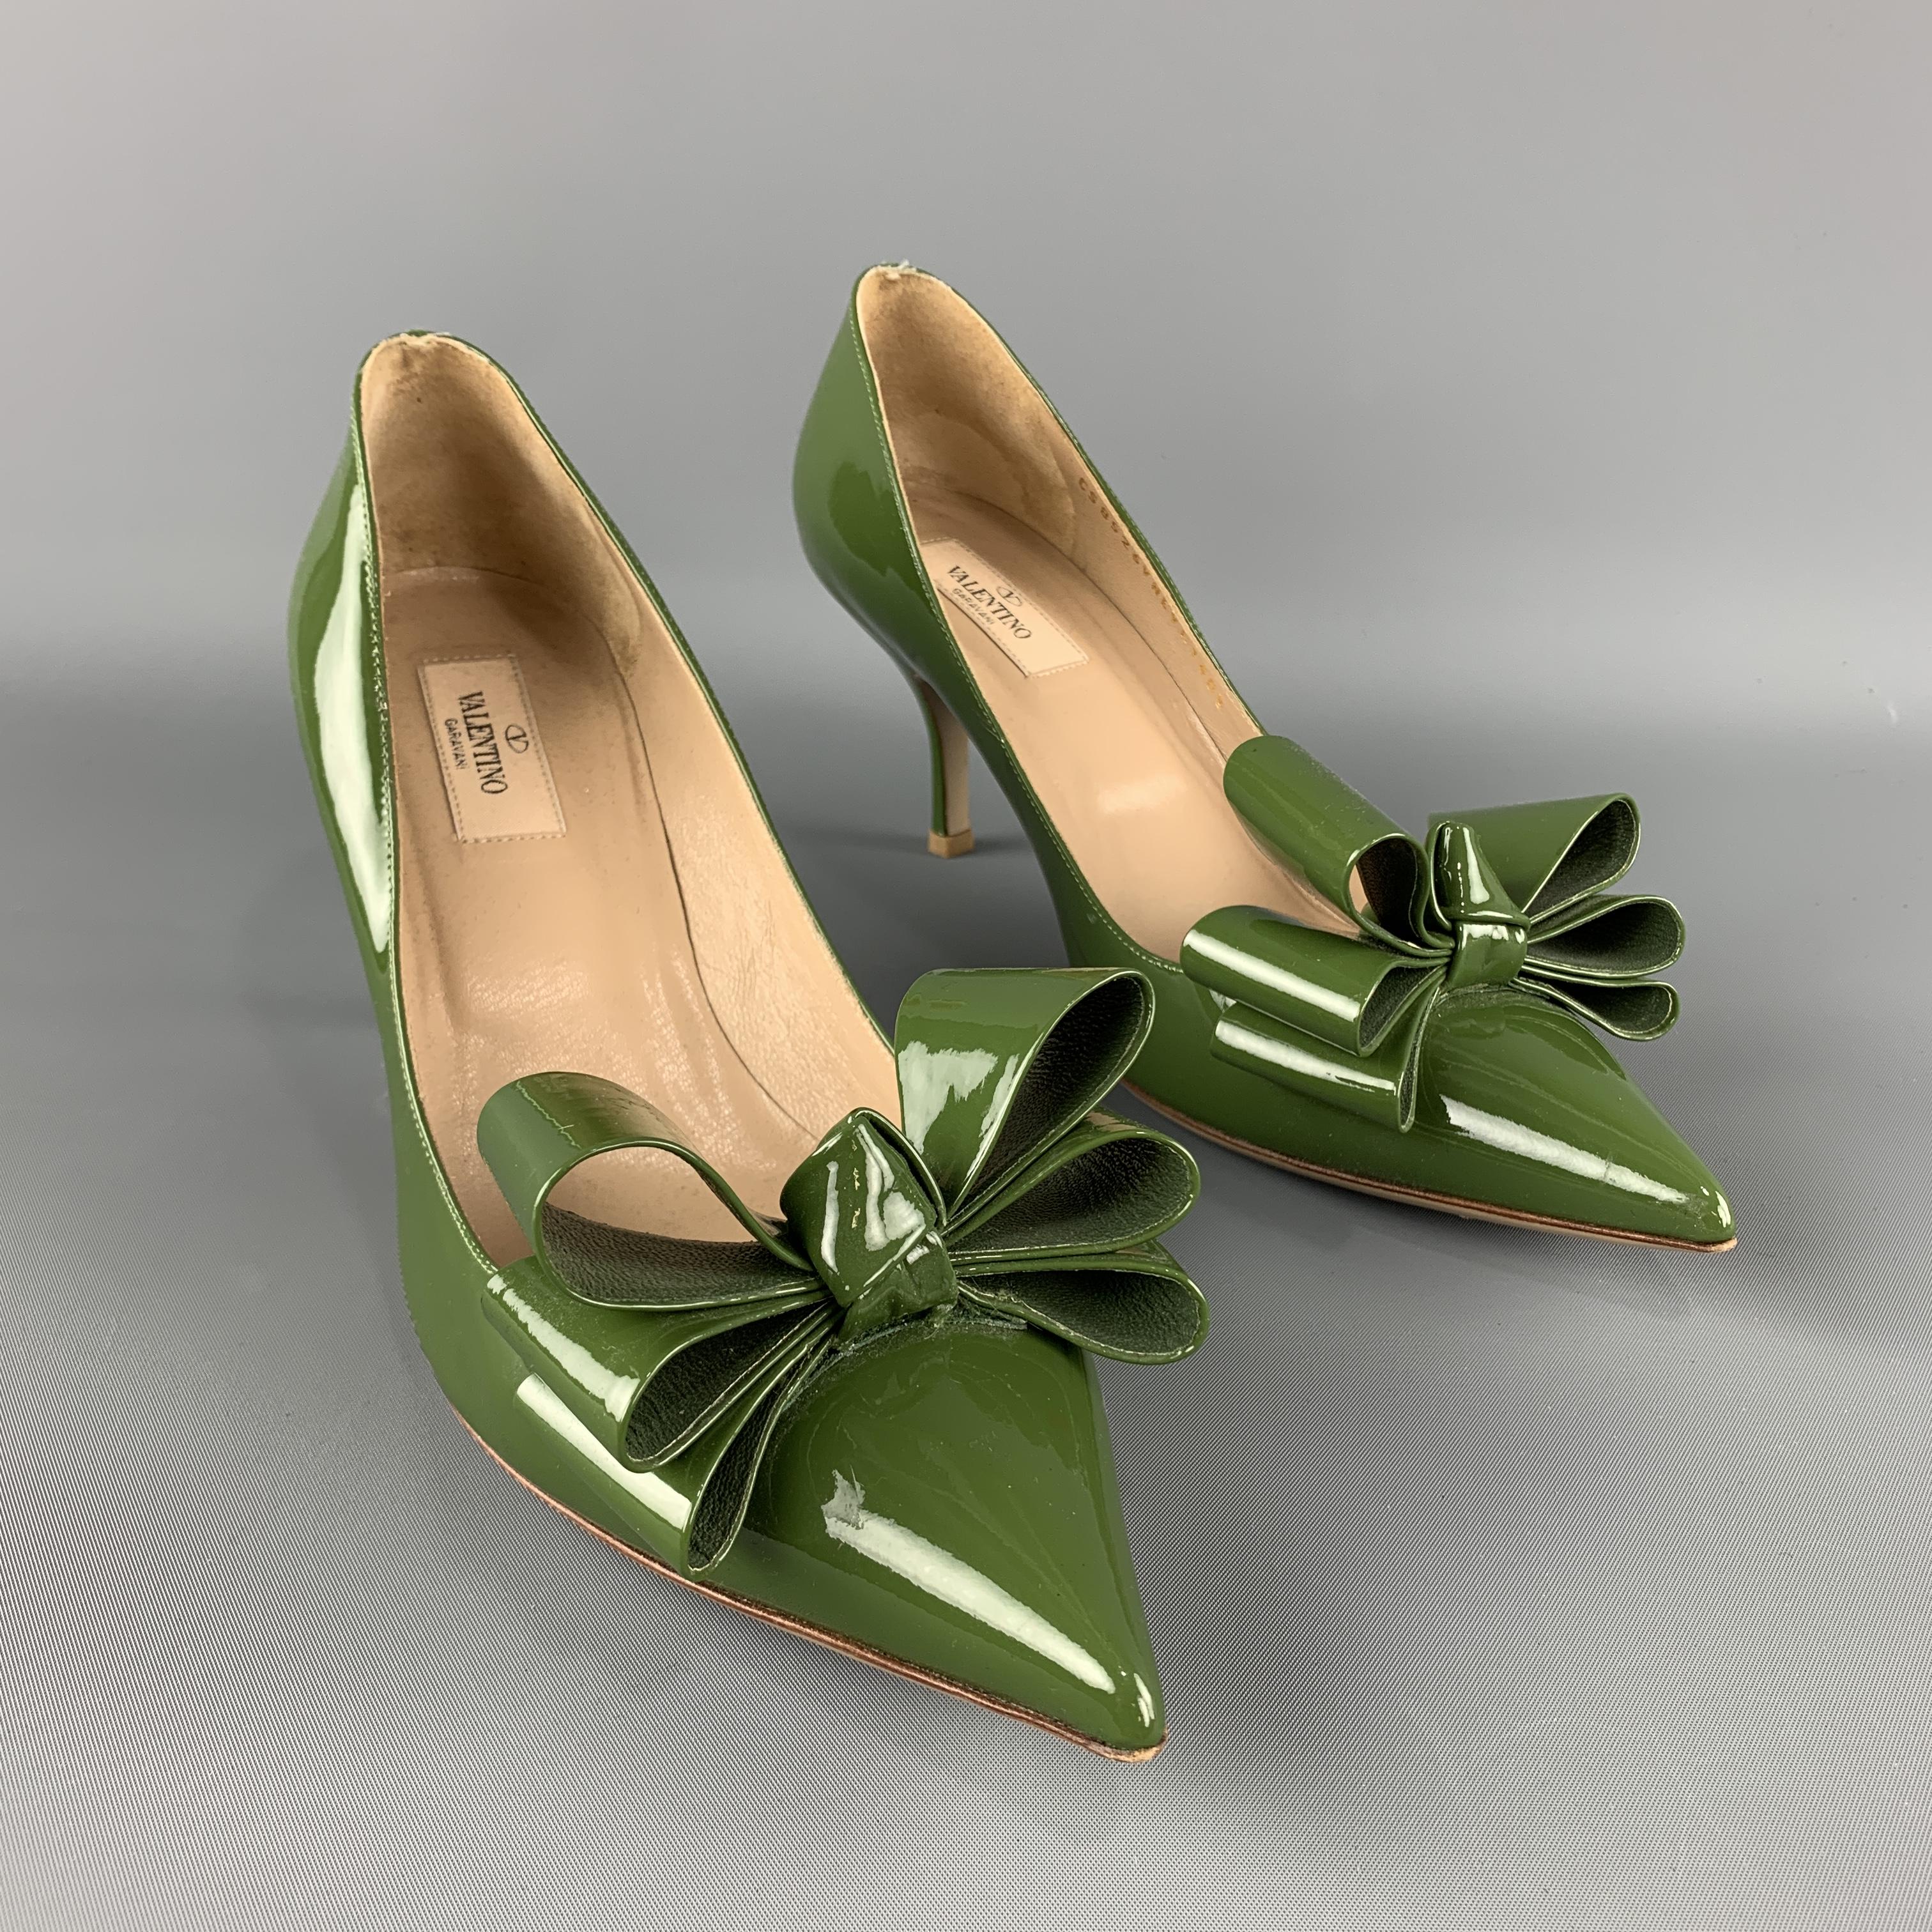 VALENTINO Versailles Bow Pump comes in a green tone in a patent leather material, with a pointed toe and a sculptural bow. Light marks.  Made in Italy.
 
Excellent Pre-Owned Condition.
Marked: IT 40 1/2   CS8526VNEVE1401/2
 
Heel: 2.5 in.